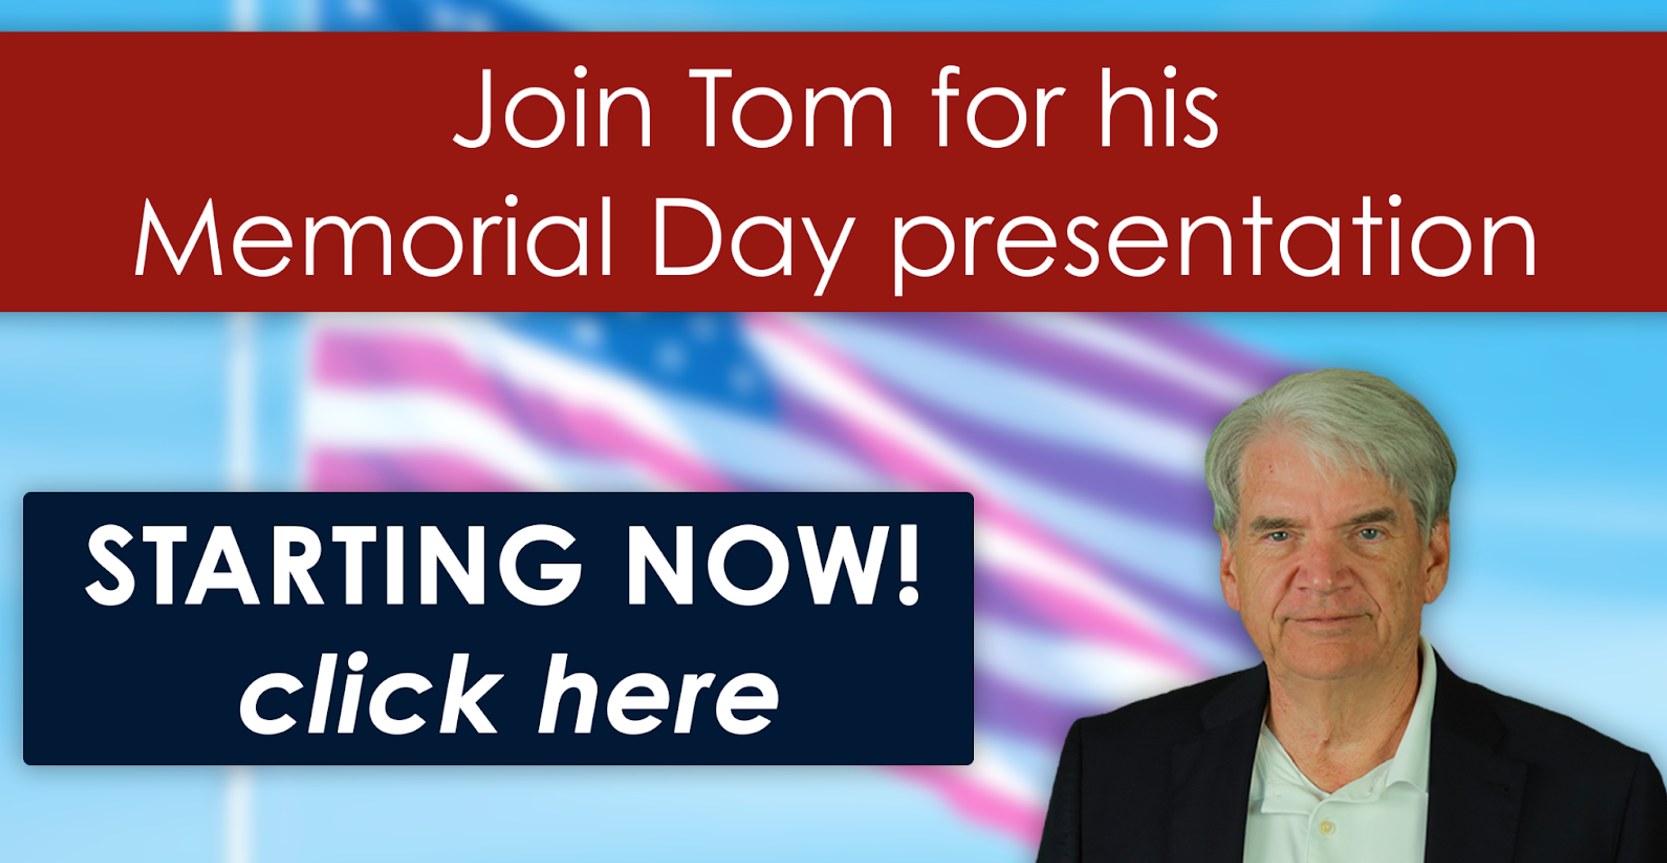 Join Tom Now